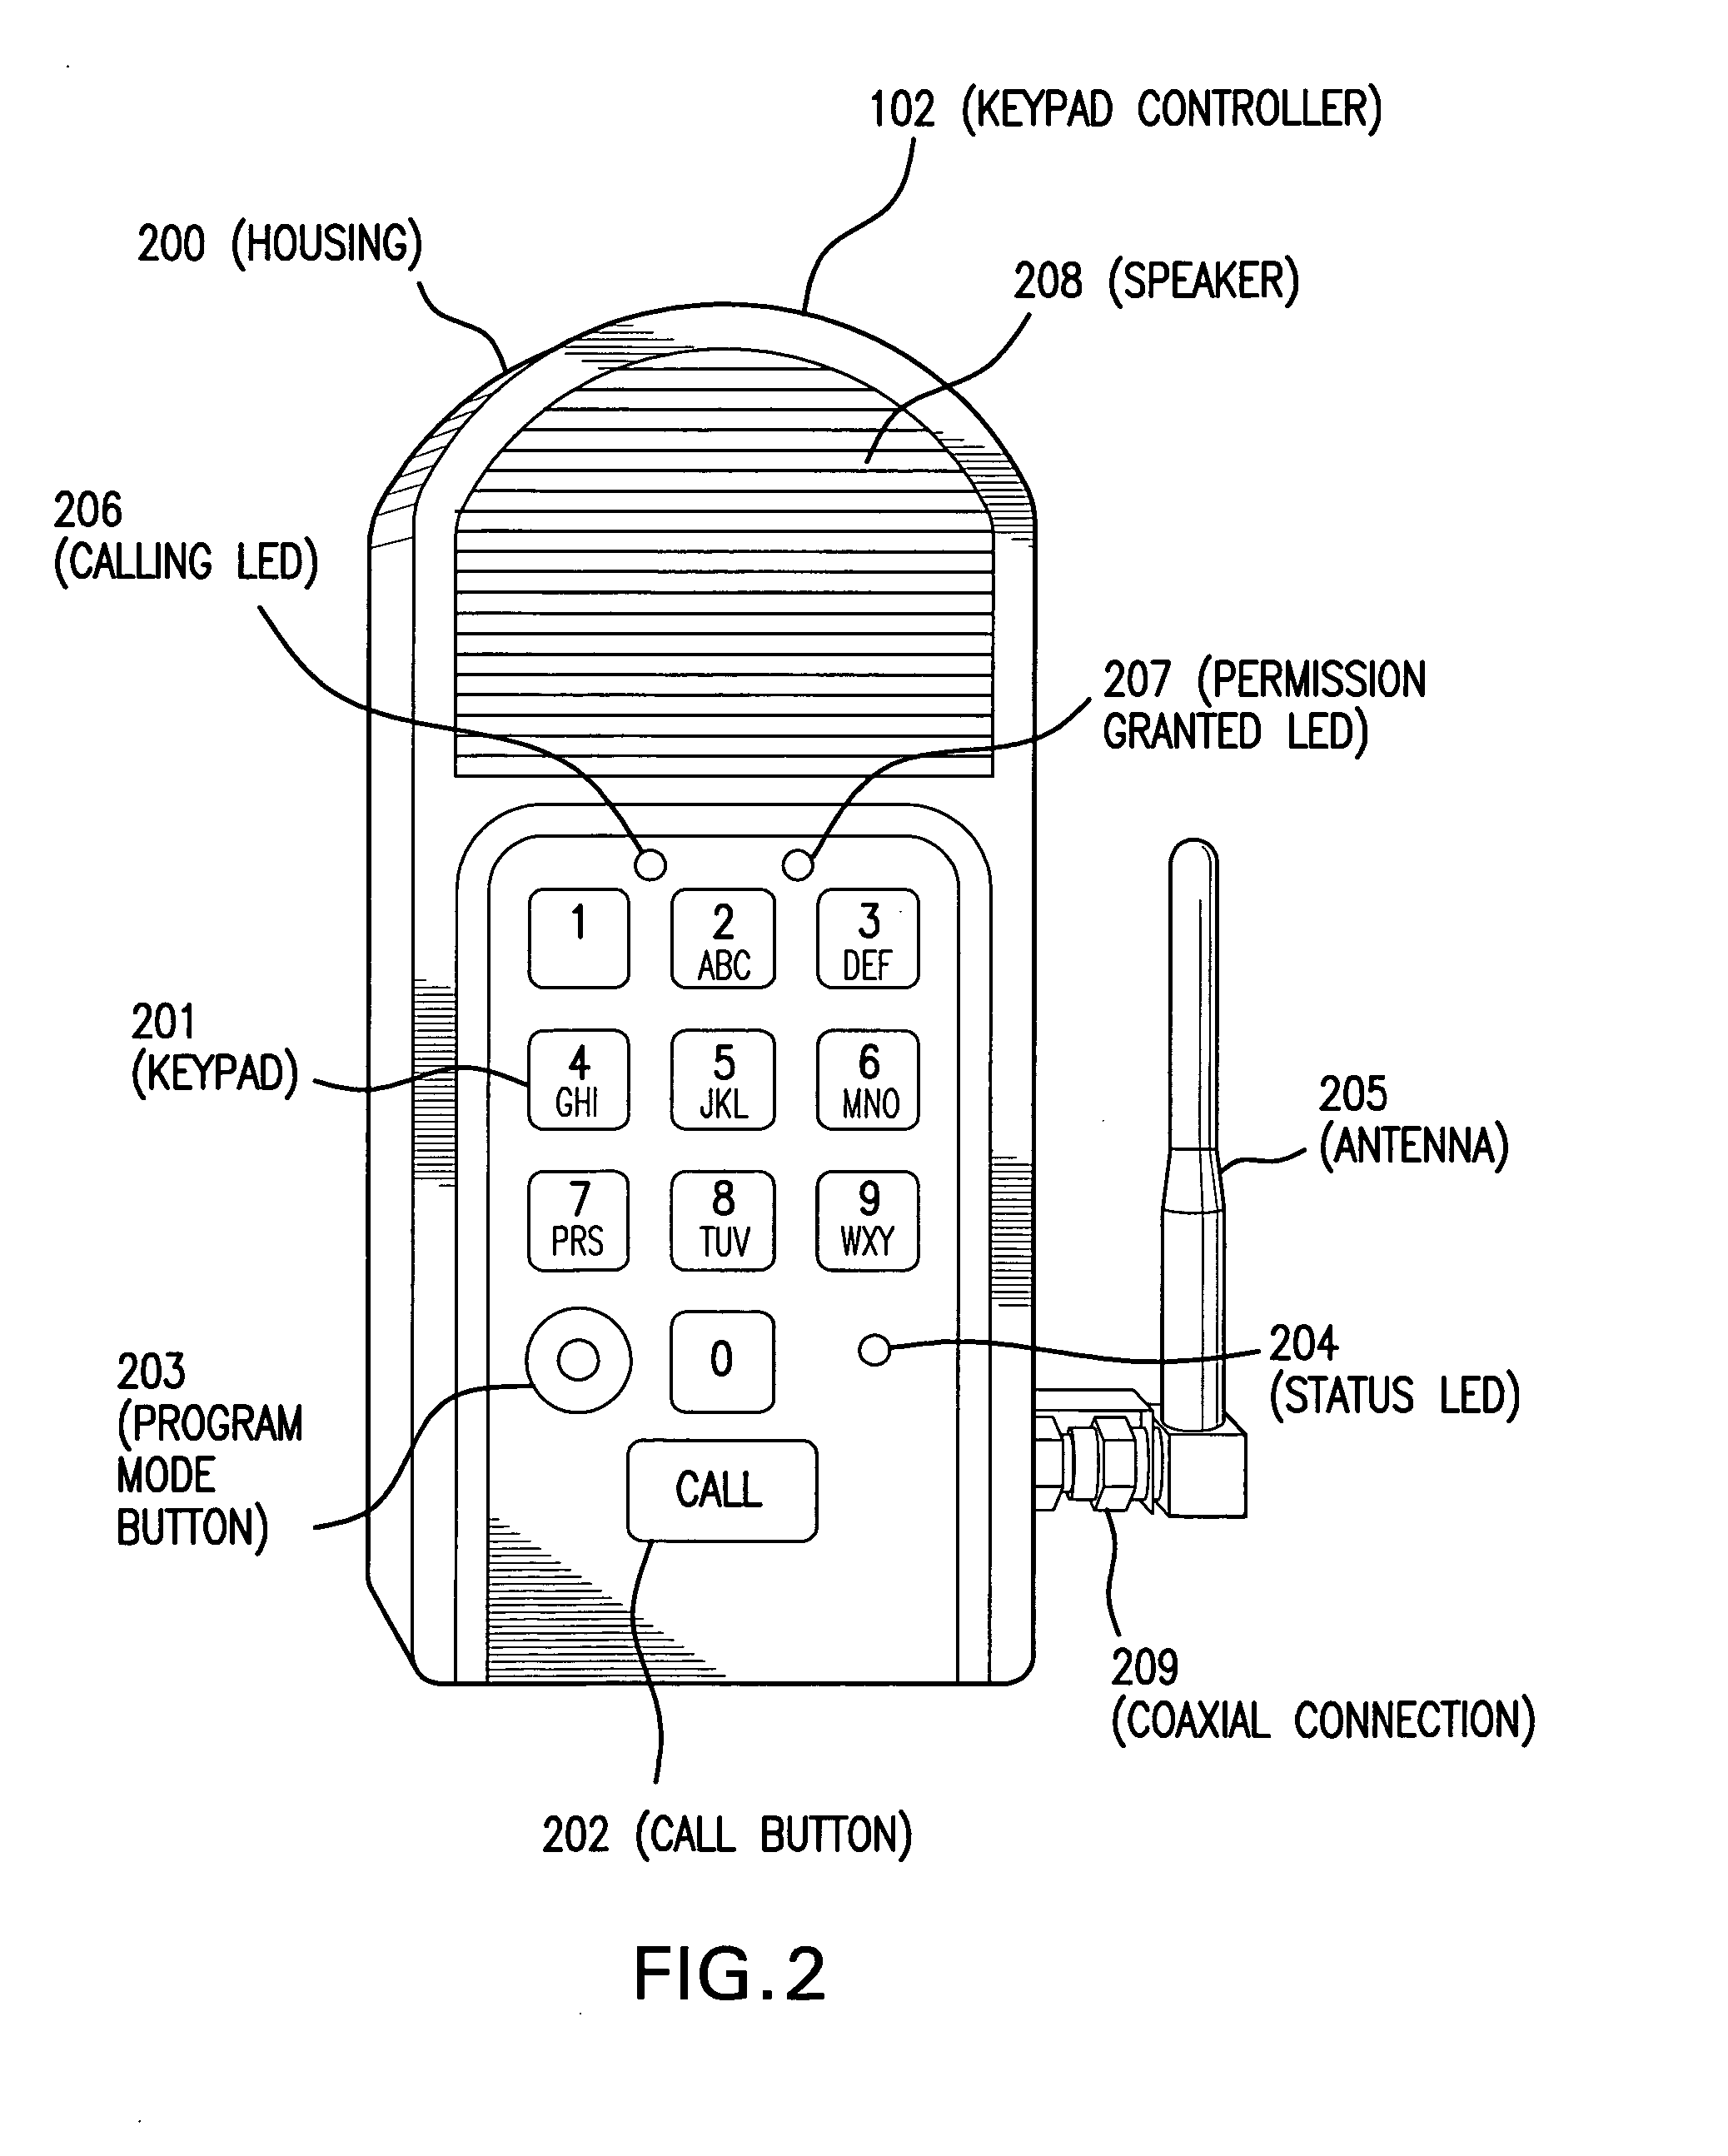 Access control system and method